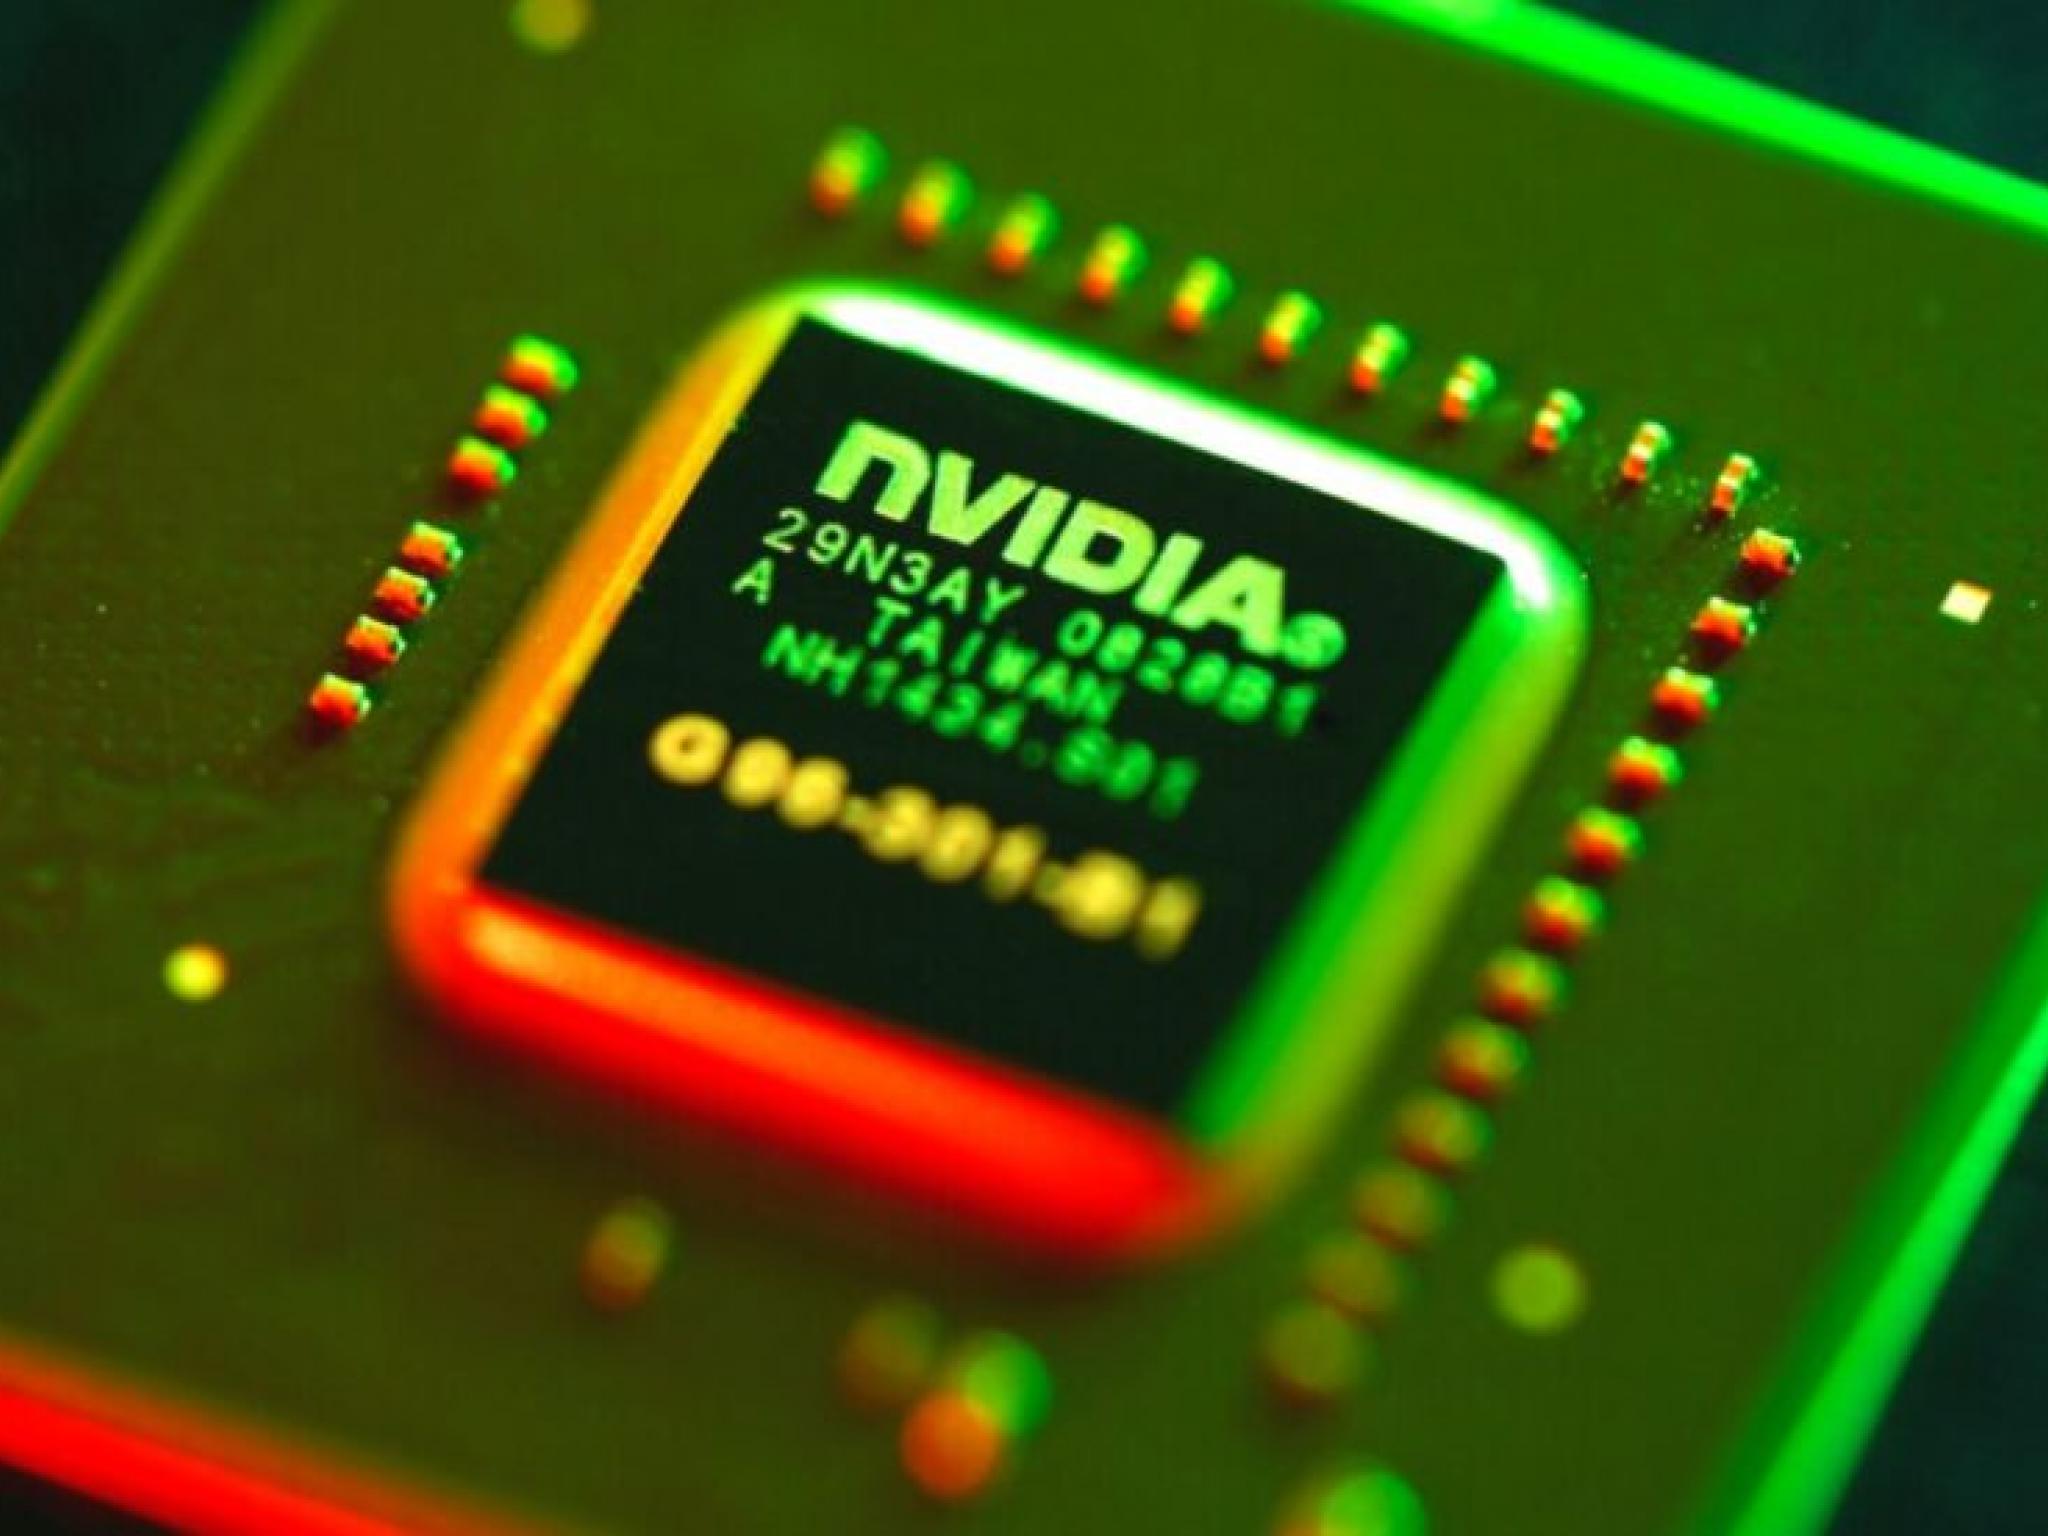  how-to-earn-500-a-month-from-nvidia-stock 